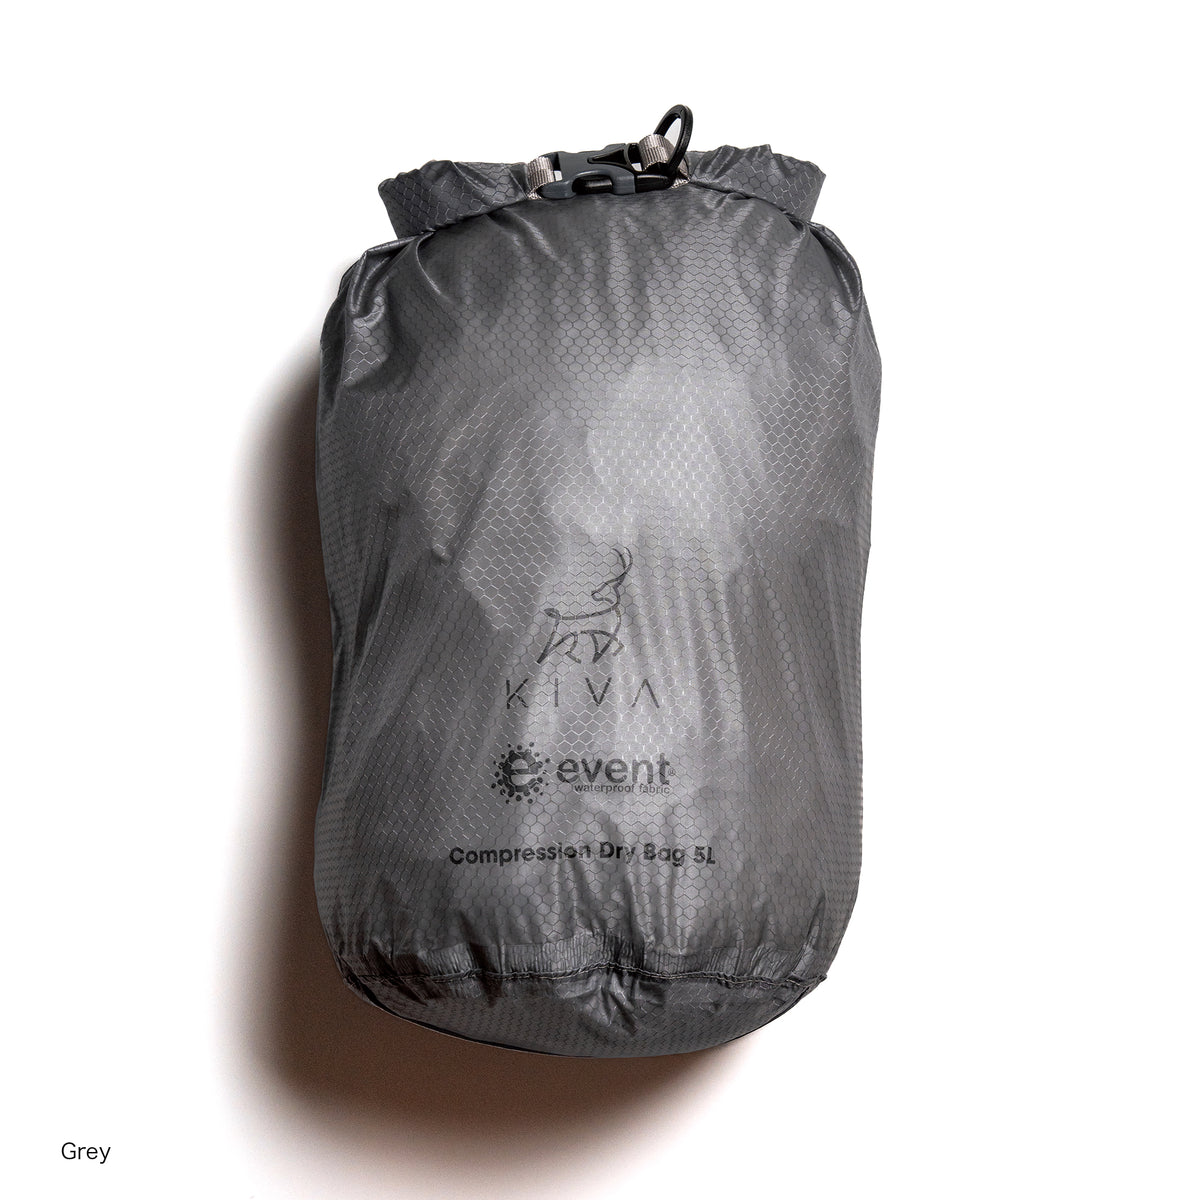 COMPRESSION DRY BAGS